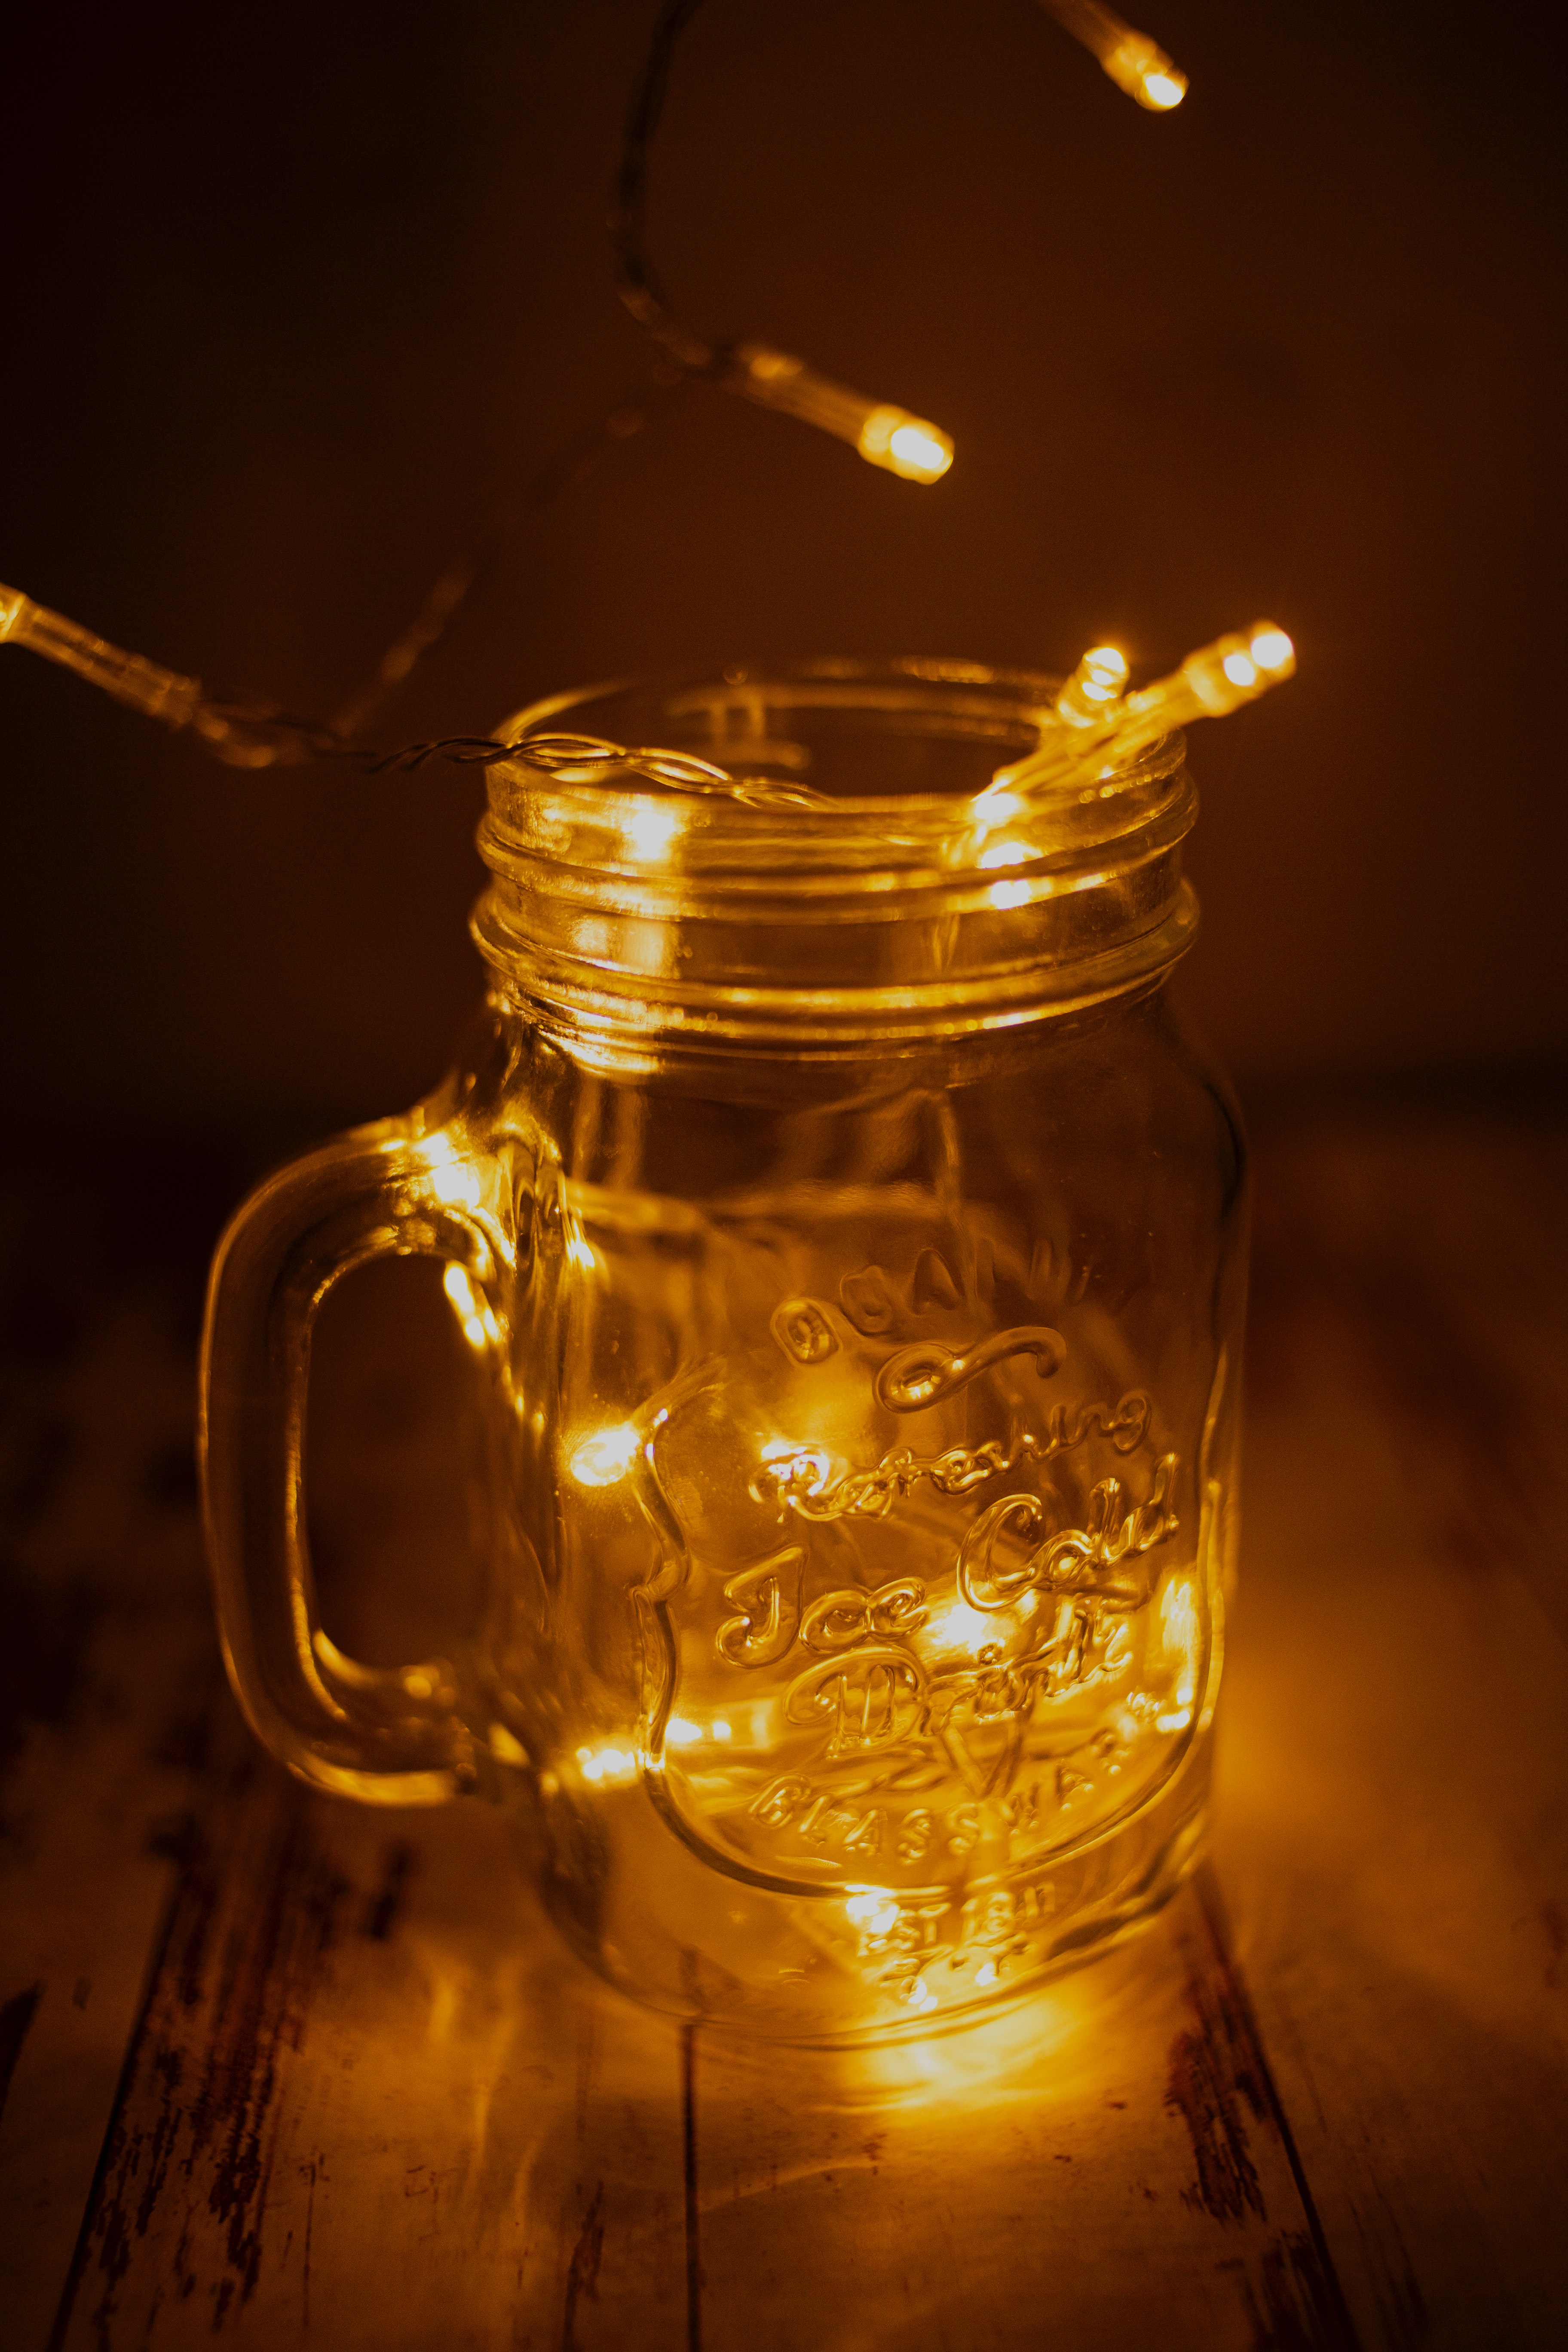 mug, cup, miscellanea, garland, shine, light, miscellaneous, glow wallpapers for tablet